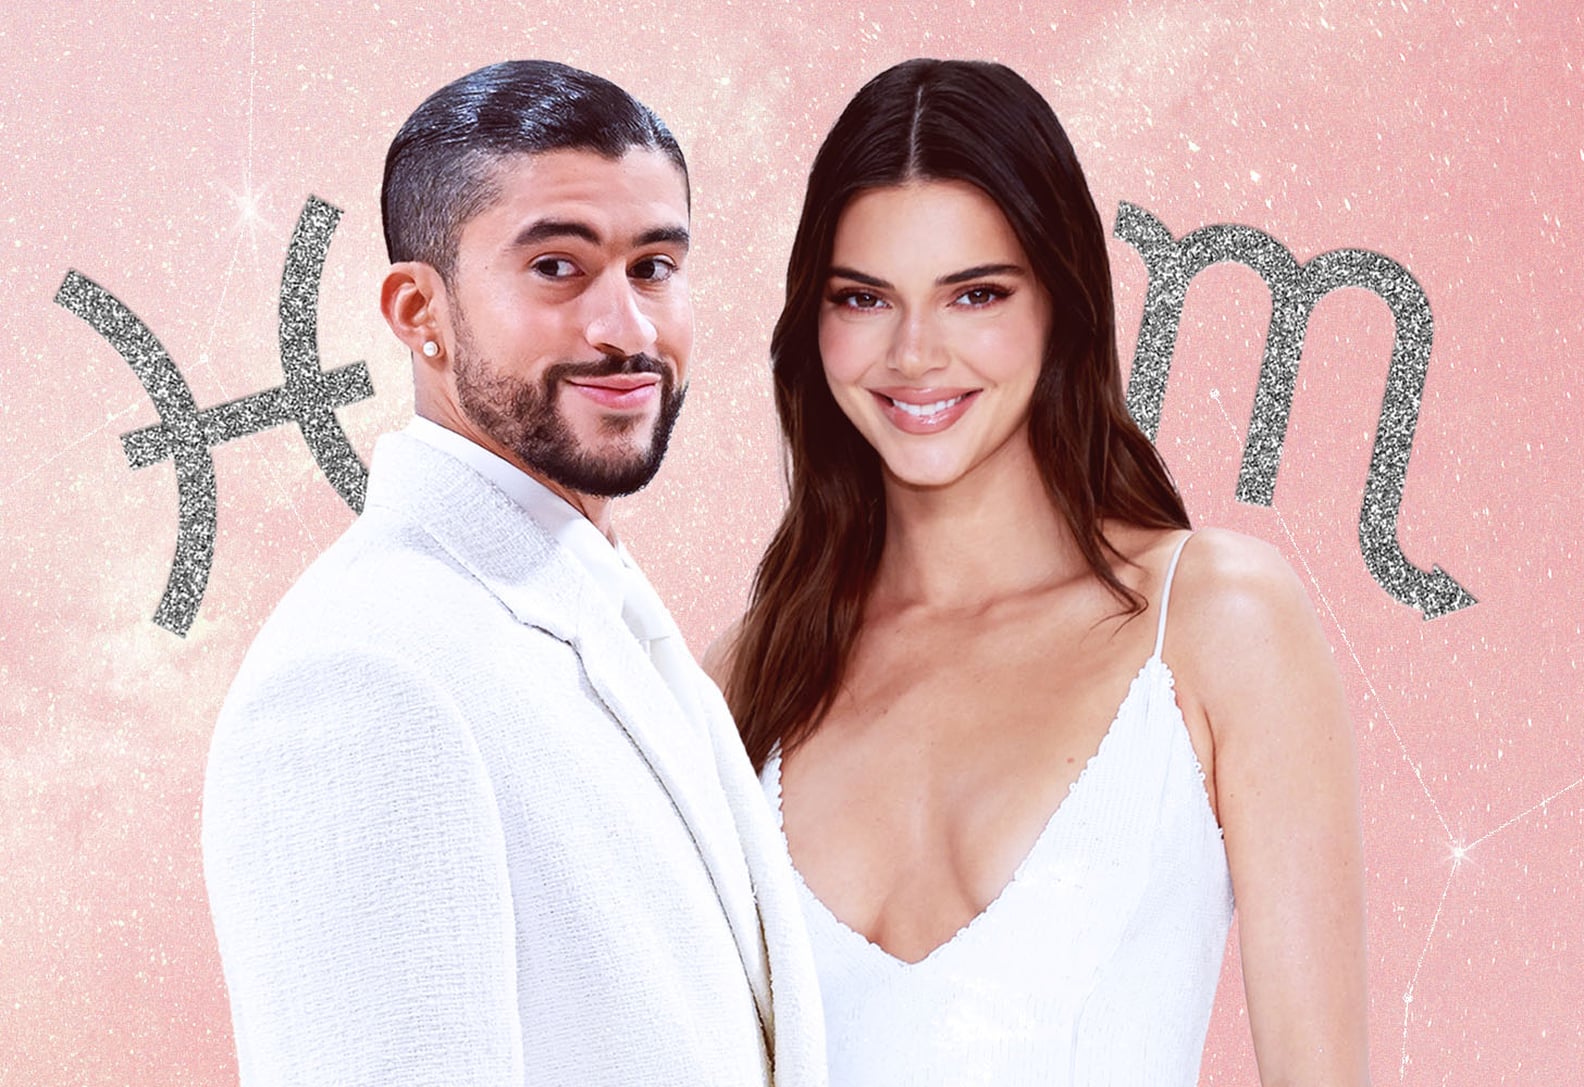 Bad Bunny and Kendall Jenner's Love: Astrology Reveals Why They're a Perfect Match and Fans Are Divided